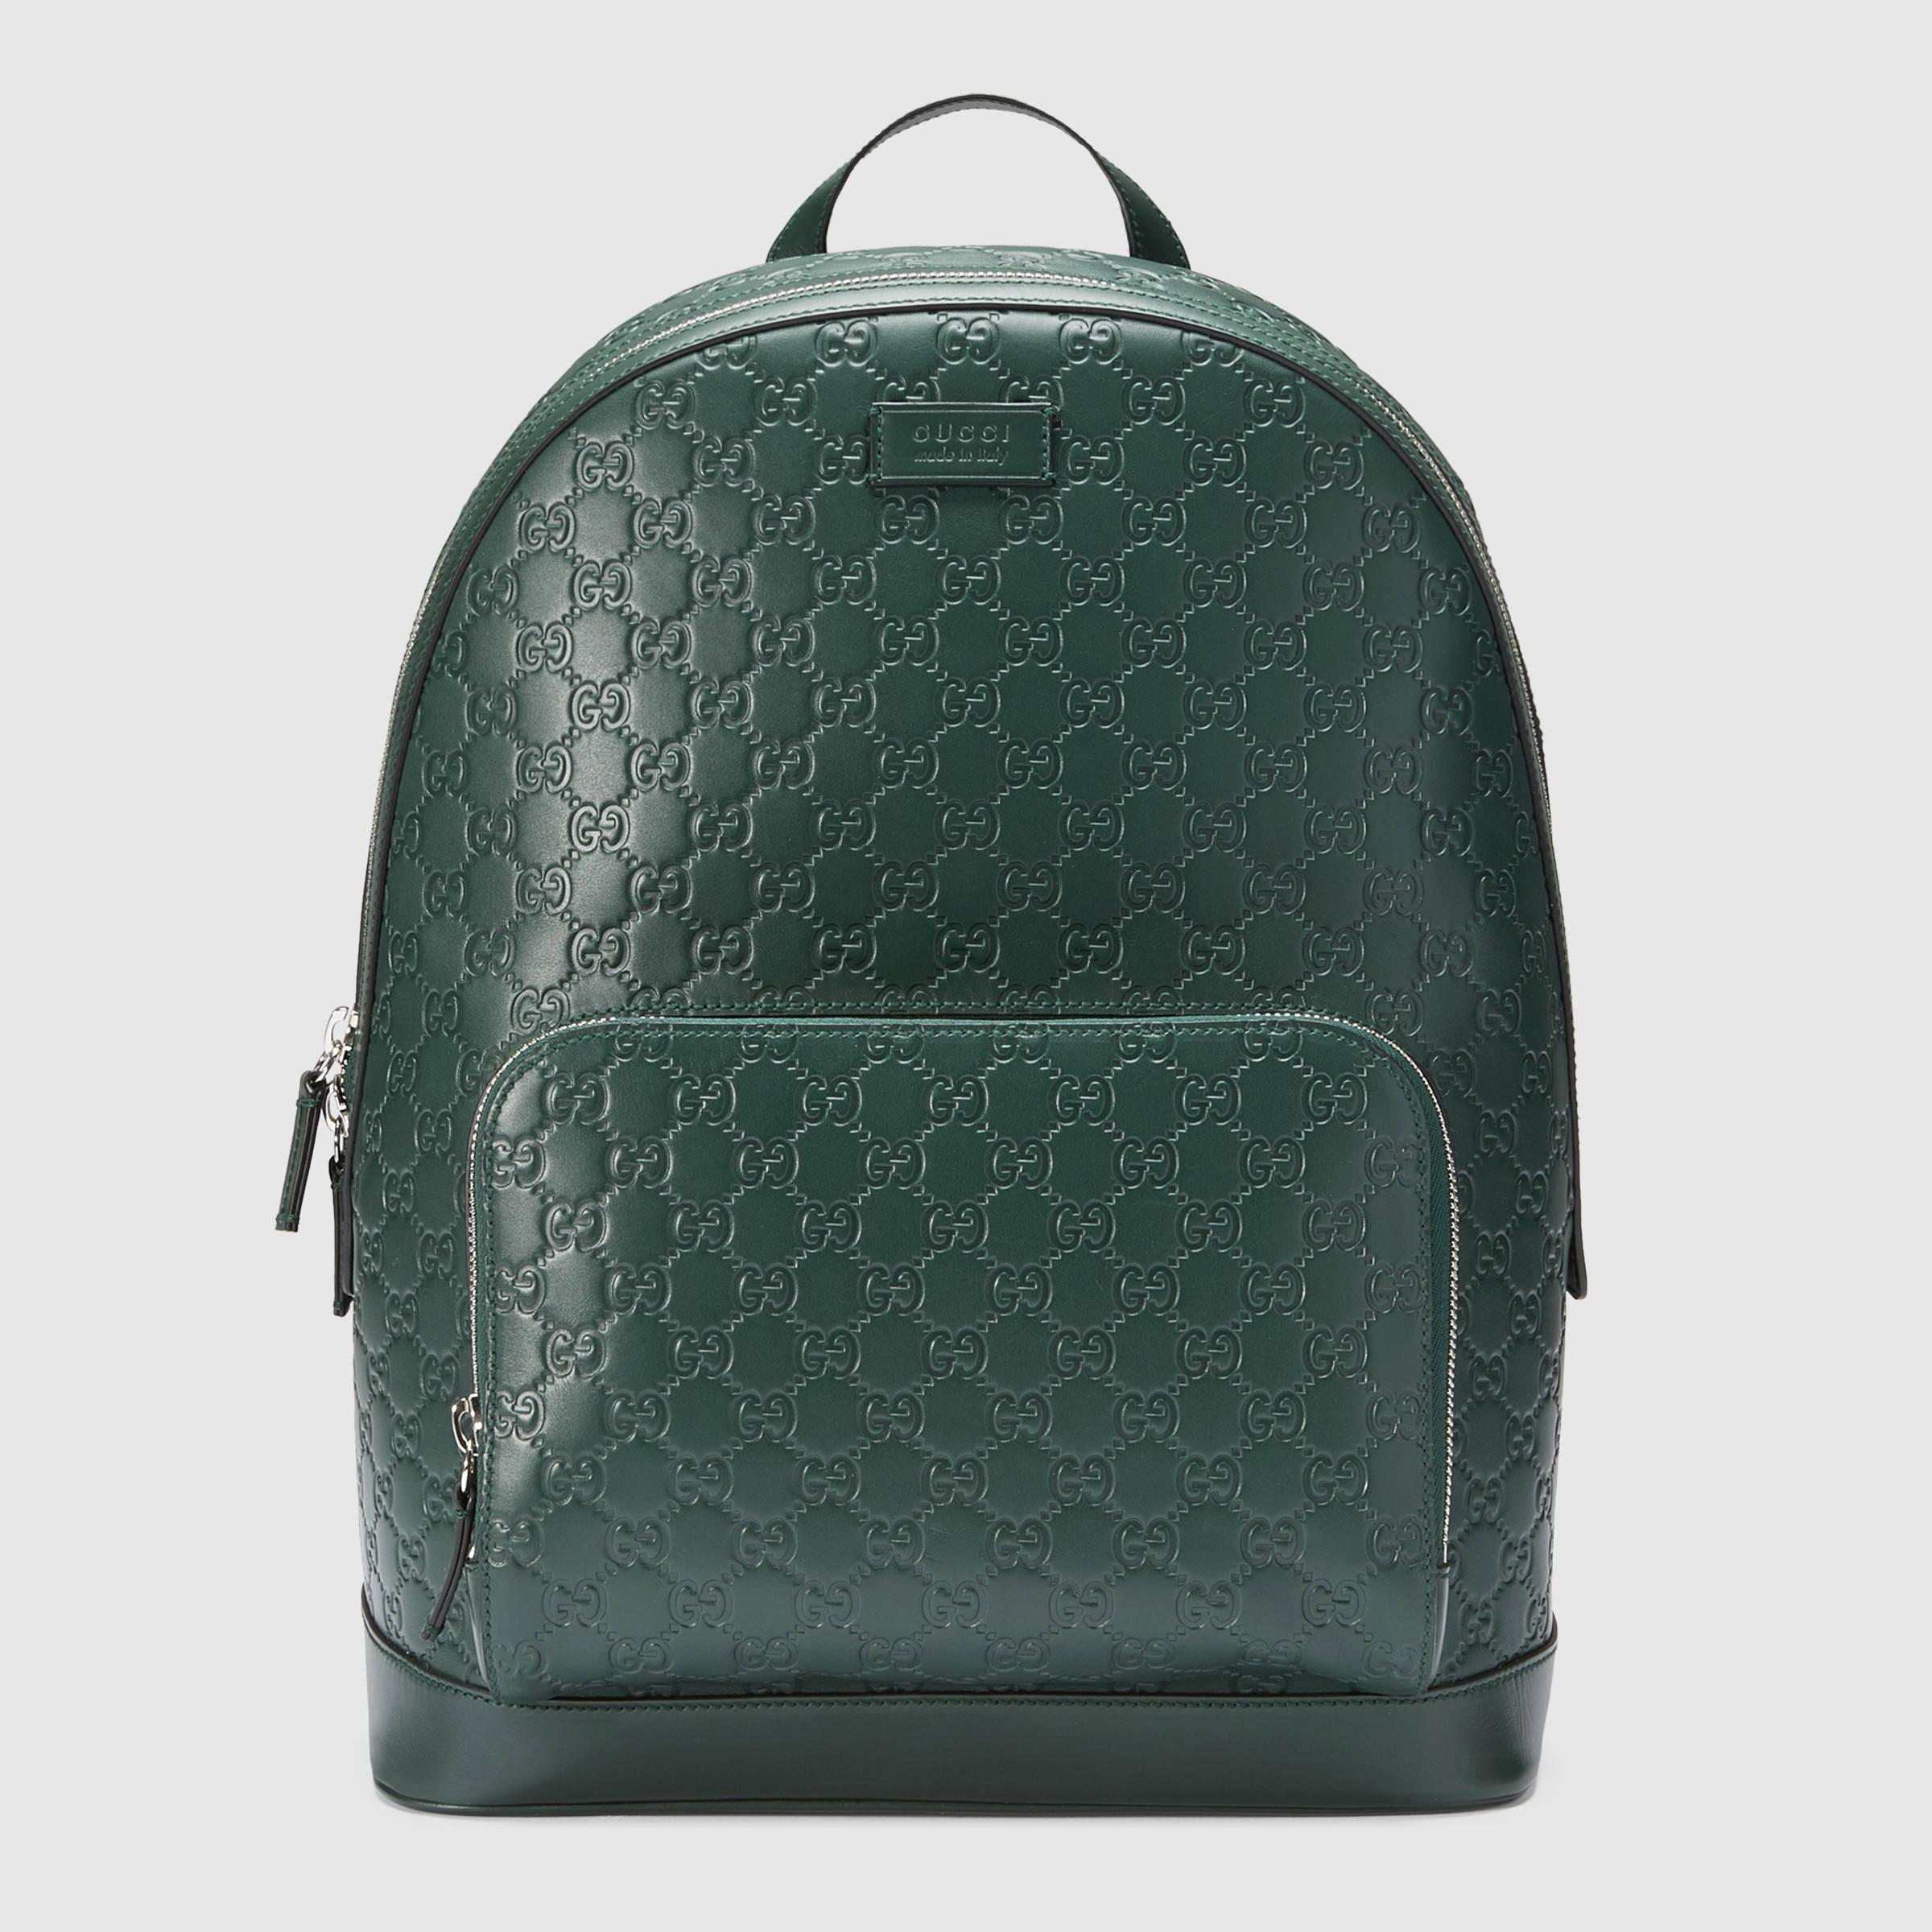 gucci green leather bag